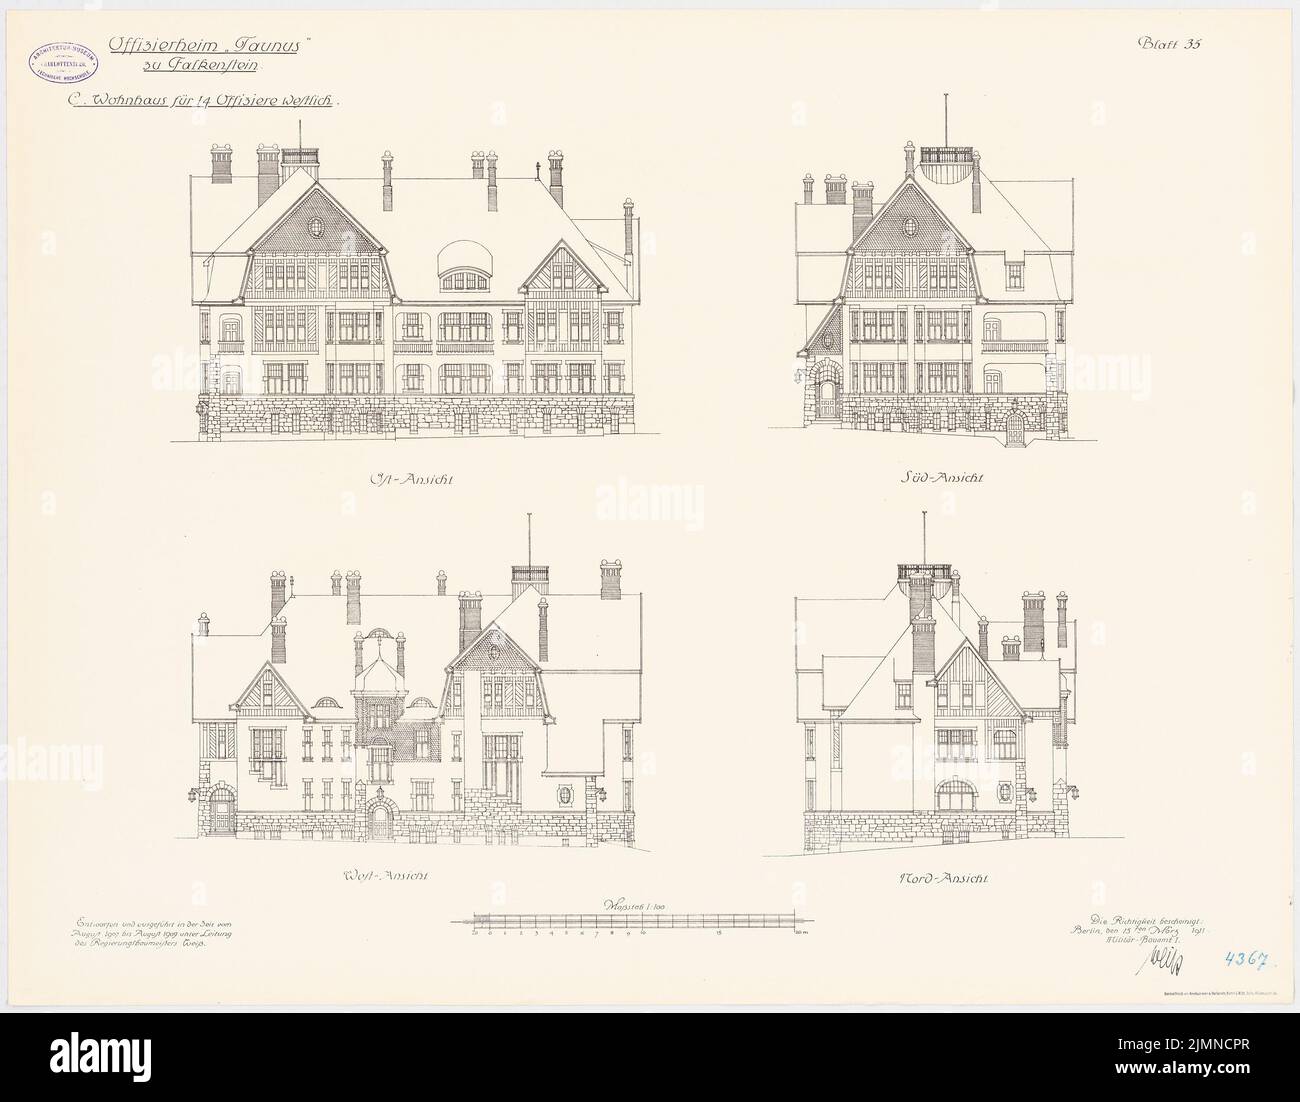 Unknown architect, Officersheim Taunus in Falkenstein. Residential building for 14 officers (west) (1907-1909): Northern view, southern view, east view, west view 1: 100. Lithograph, 66.1 x 84.8 cm (including scan edges) Stock Photo